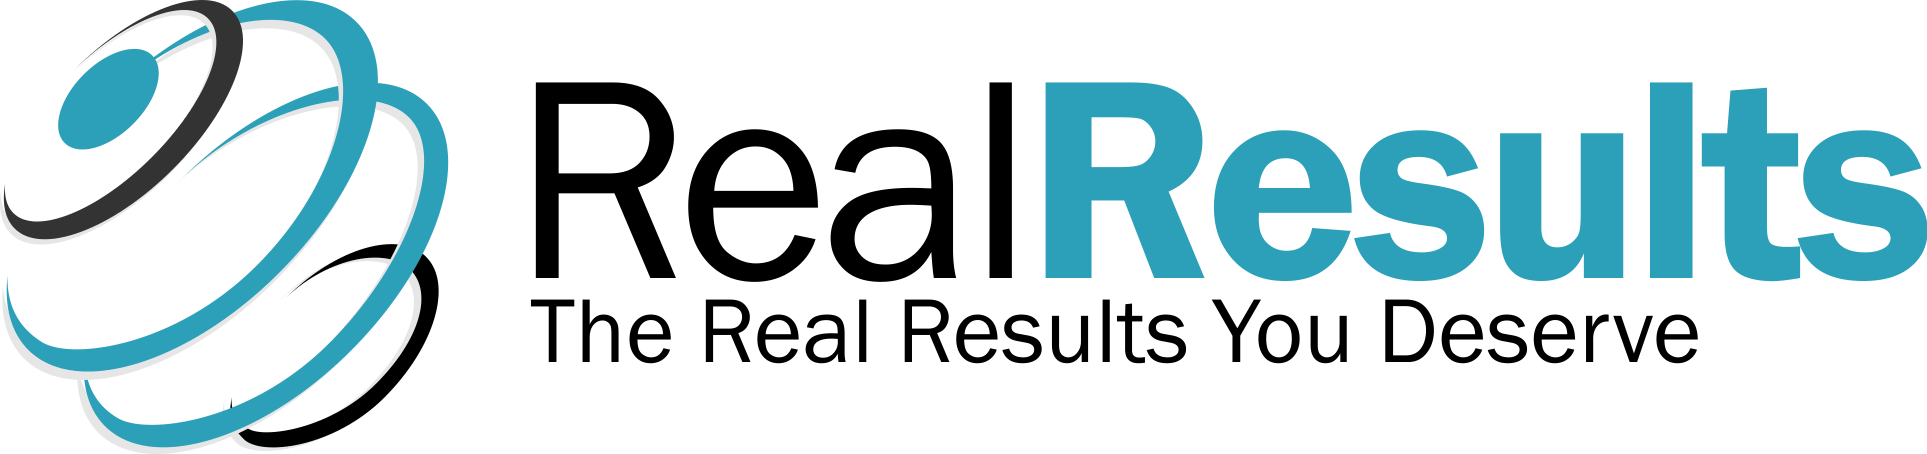 Results Logo - Real Results | Lead Generation Meet Sales Automation